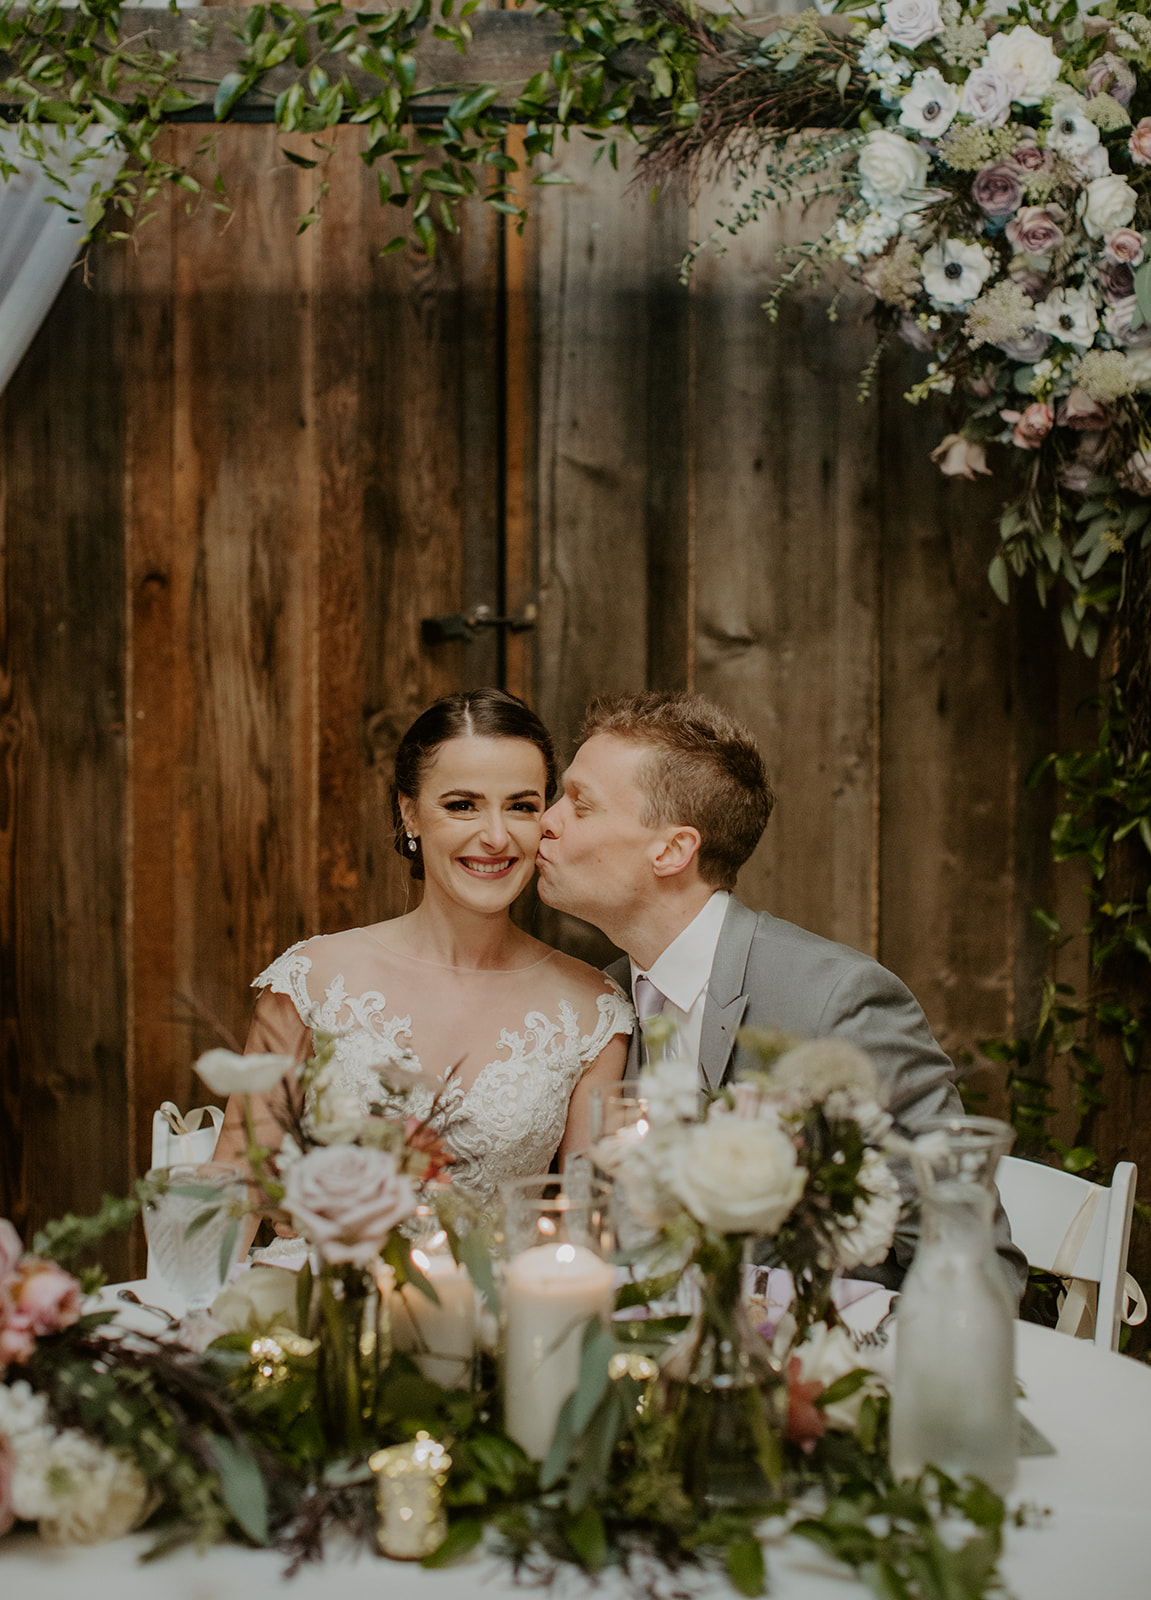 The sweetheart table with couple kissing